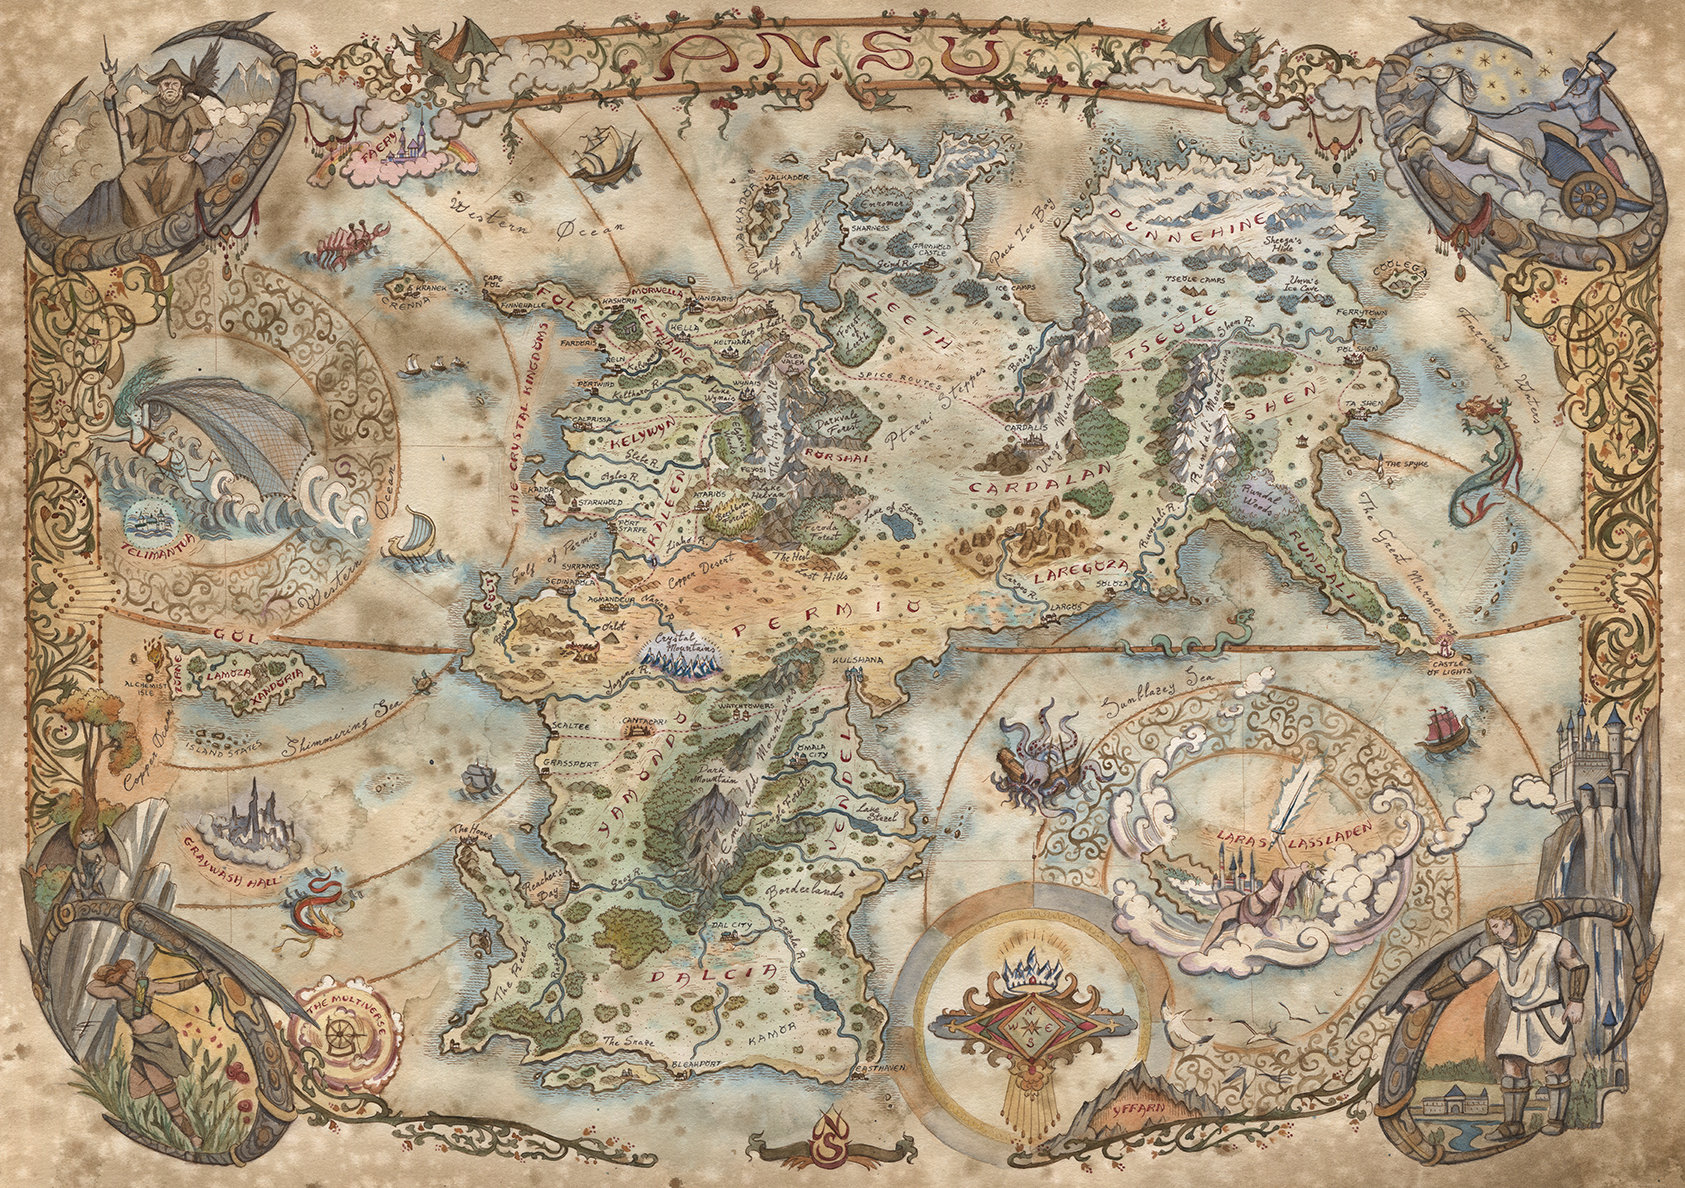 Map of Legends of Ansu